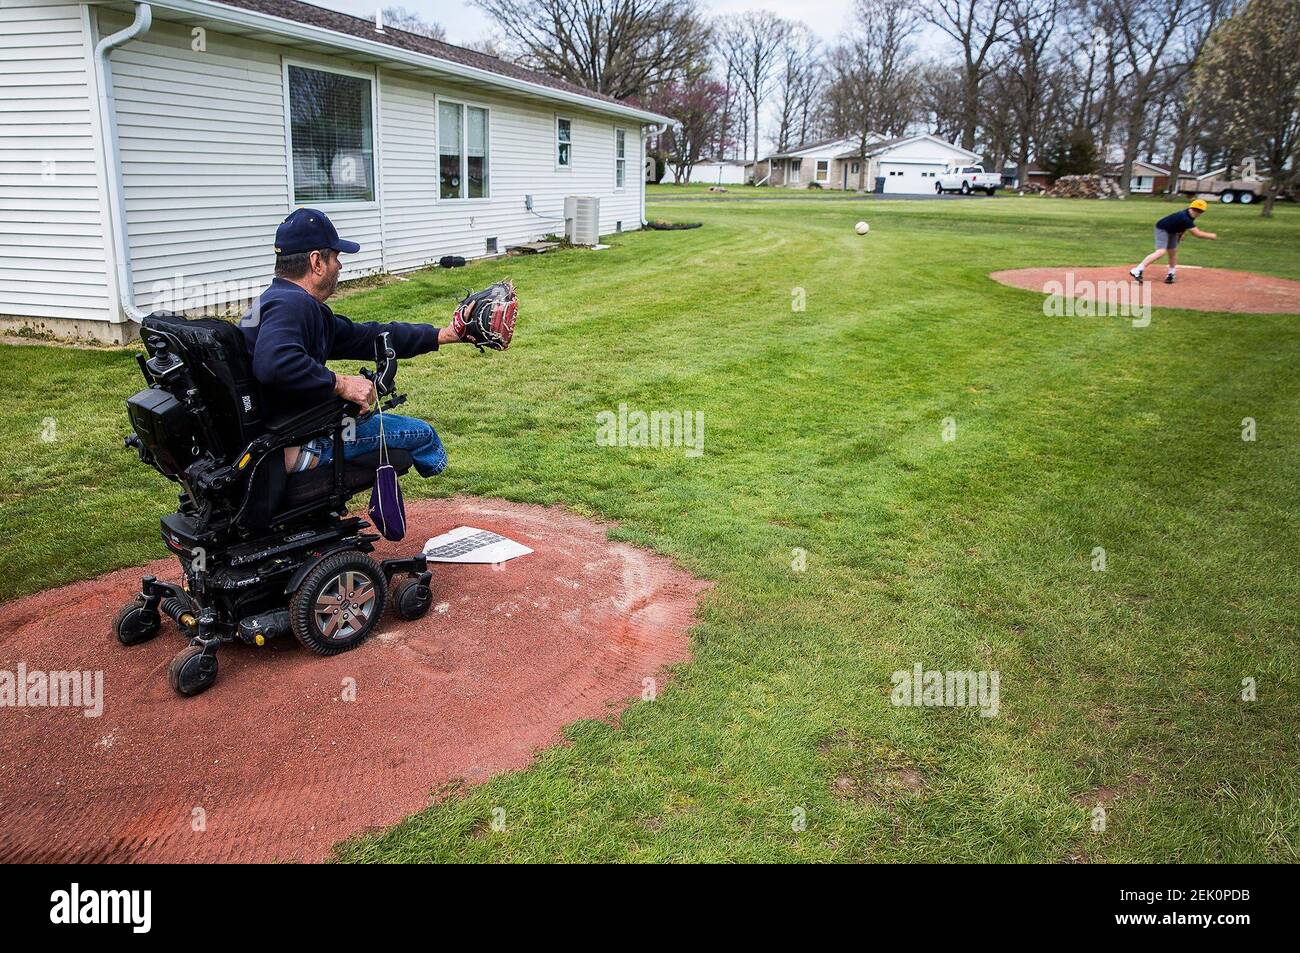 Bob Gillum coaches two of his grandsons using the family's backyard pitching mound Thursday, April 23, 2020. Pitchingfamily7t0a6568 (Photo by Jordan Kartholl / The Star Press, Muncie Star Press via Imagn Content Services, LLC/USA Today Network/Sipa USA) Stock Photo